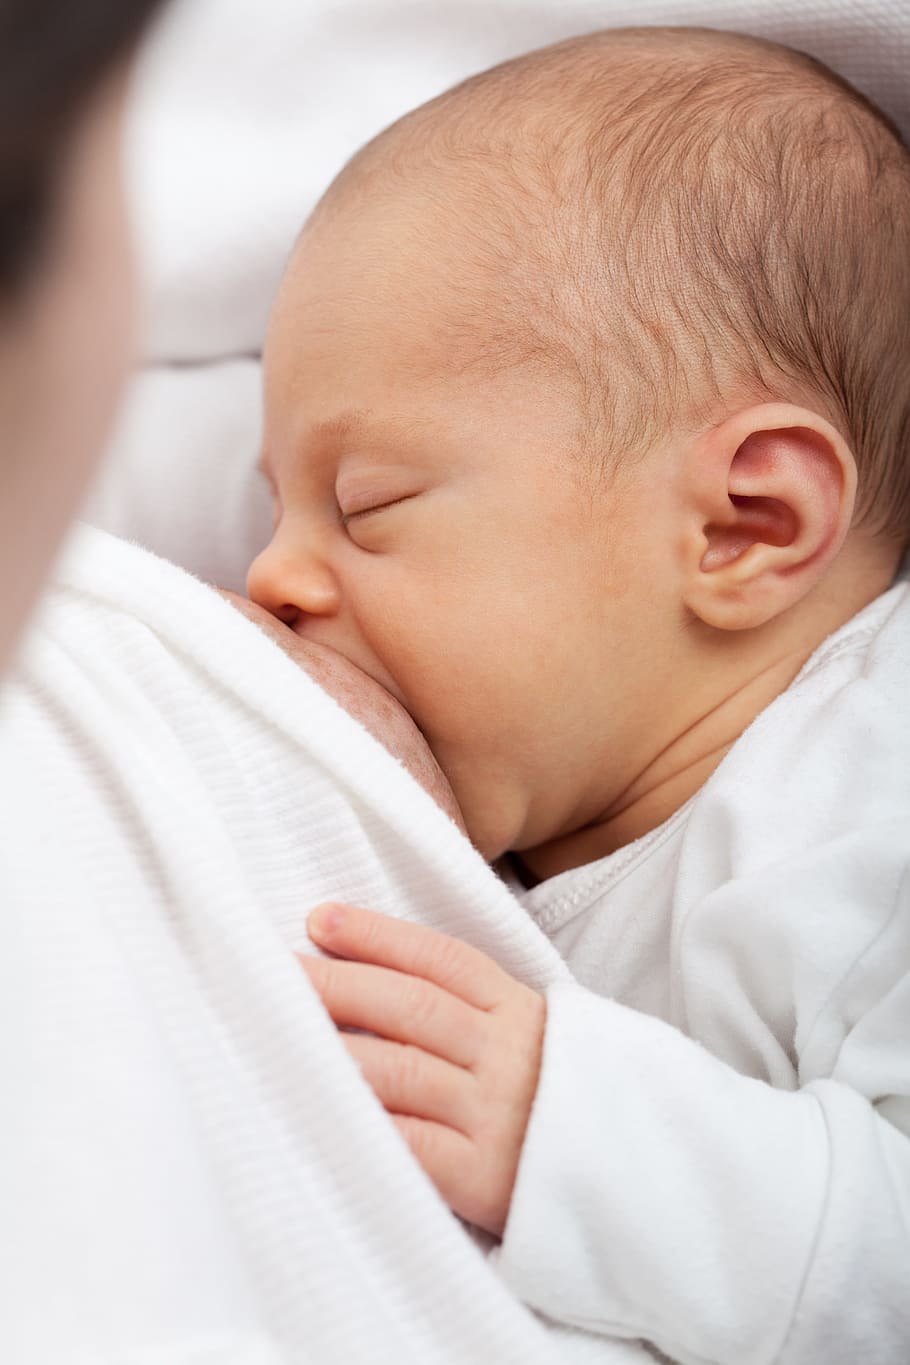 10 benefits of breastfeeding for your baby  HealthShots